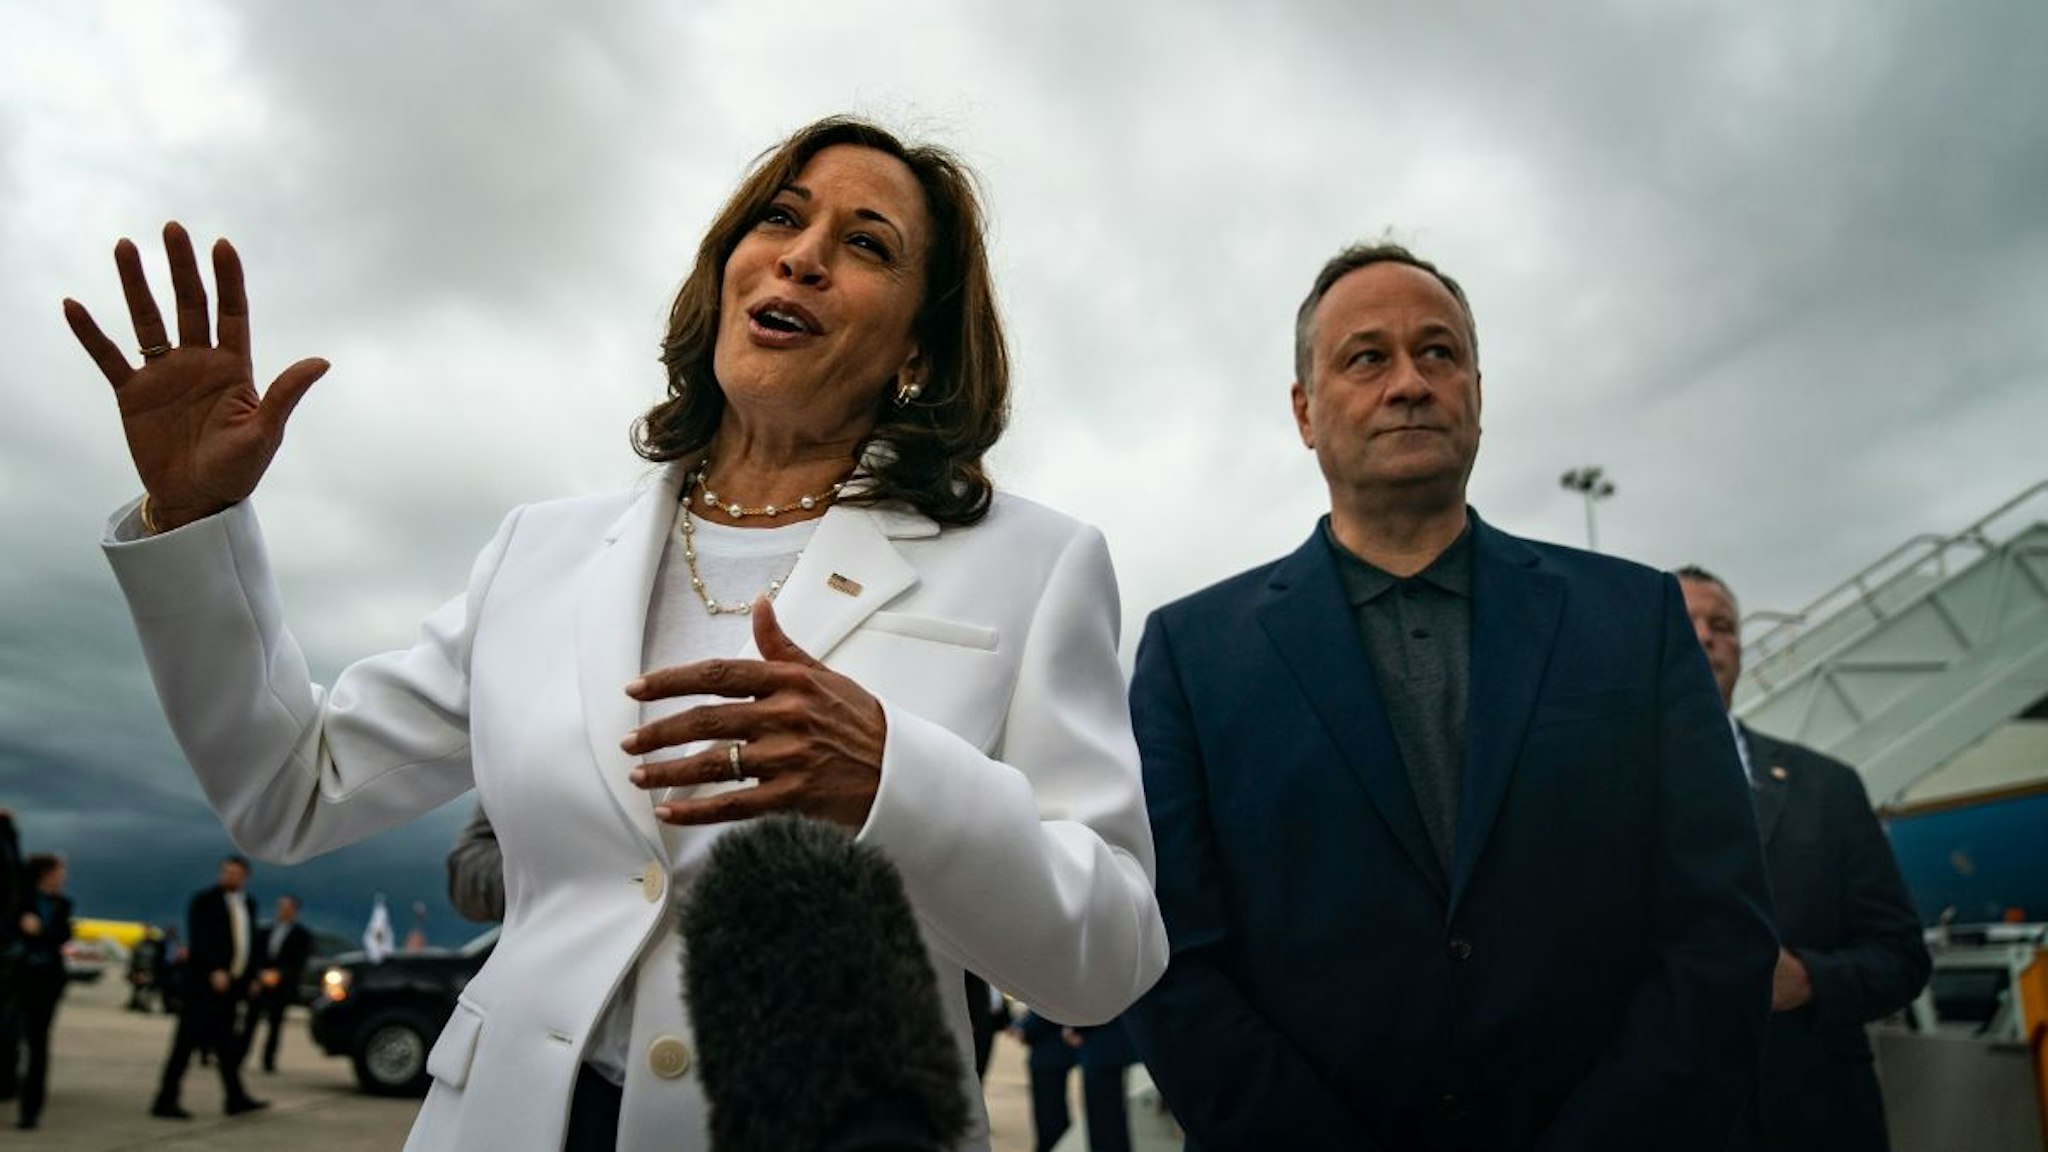 Vice President Kamala Harris speaks to members of the press, joined by Second Gentleman Doug Emhoff after disembarking from Air Force 2 at Orlando International Airport on Sunday, Aug. 28, 2022 in Orlando, FL.